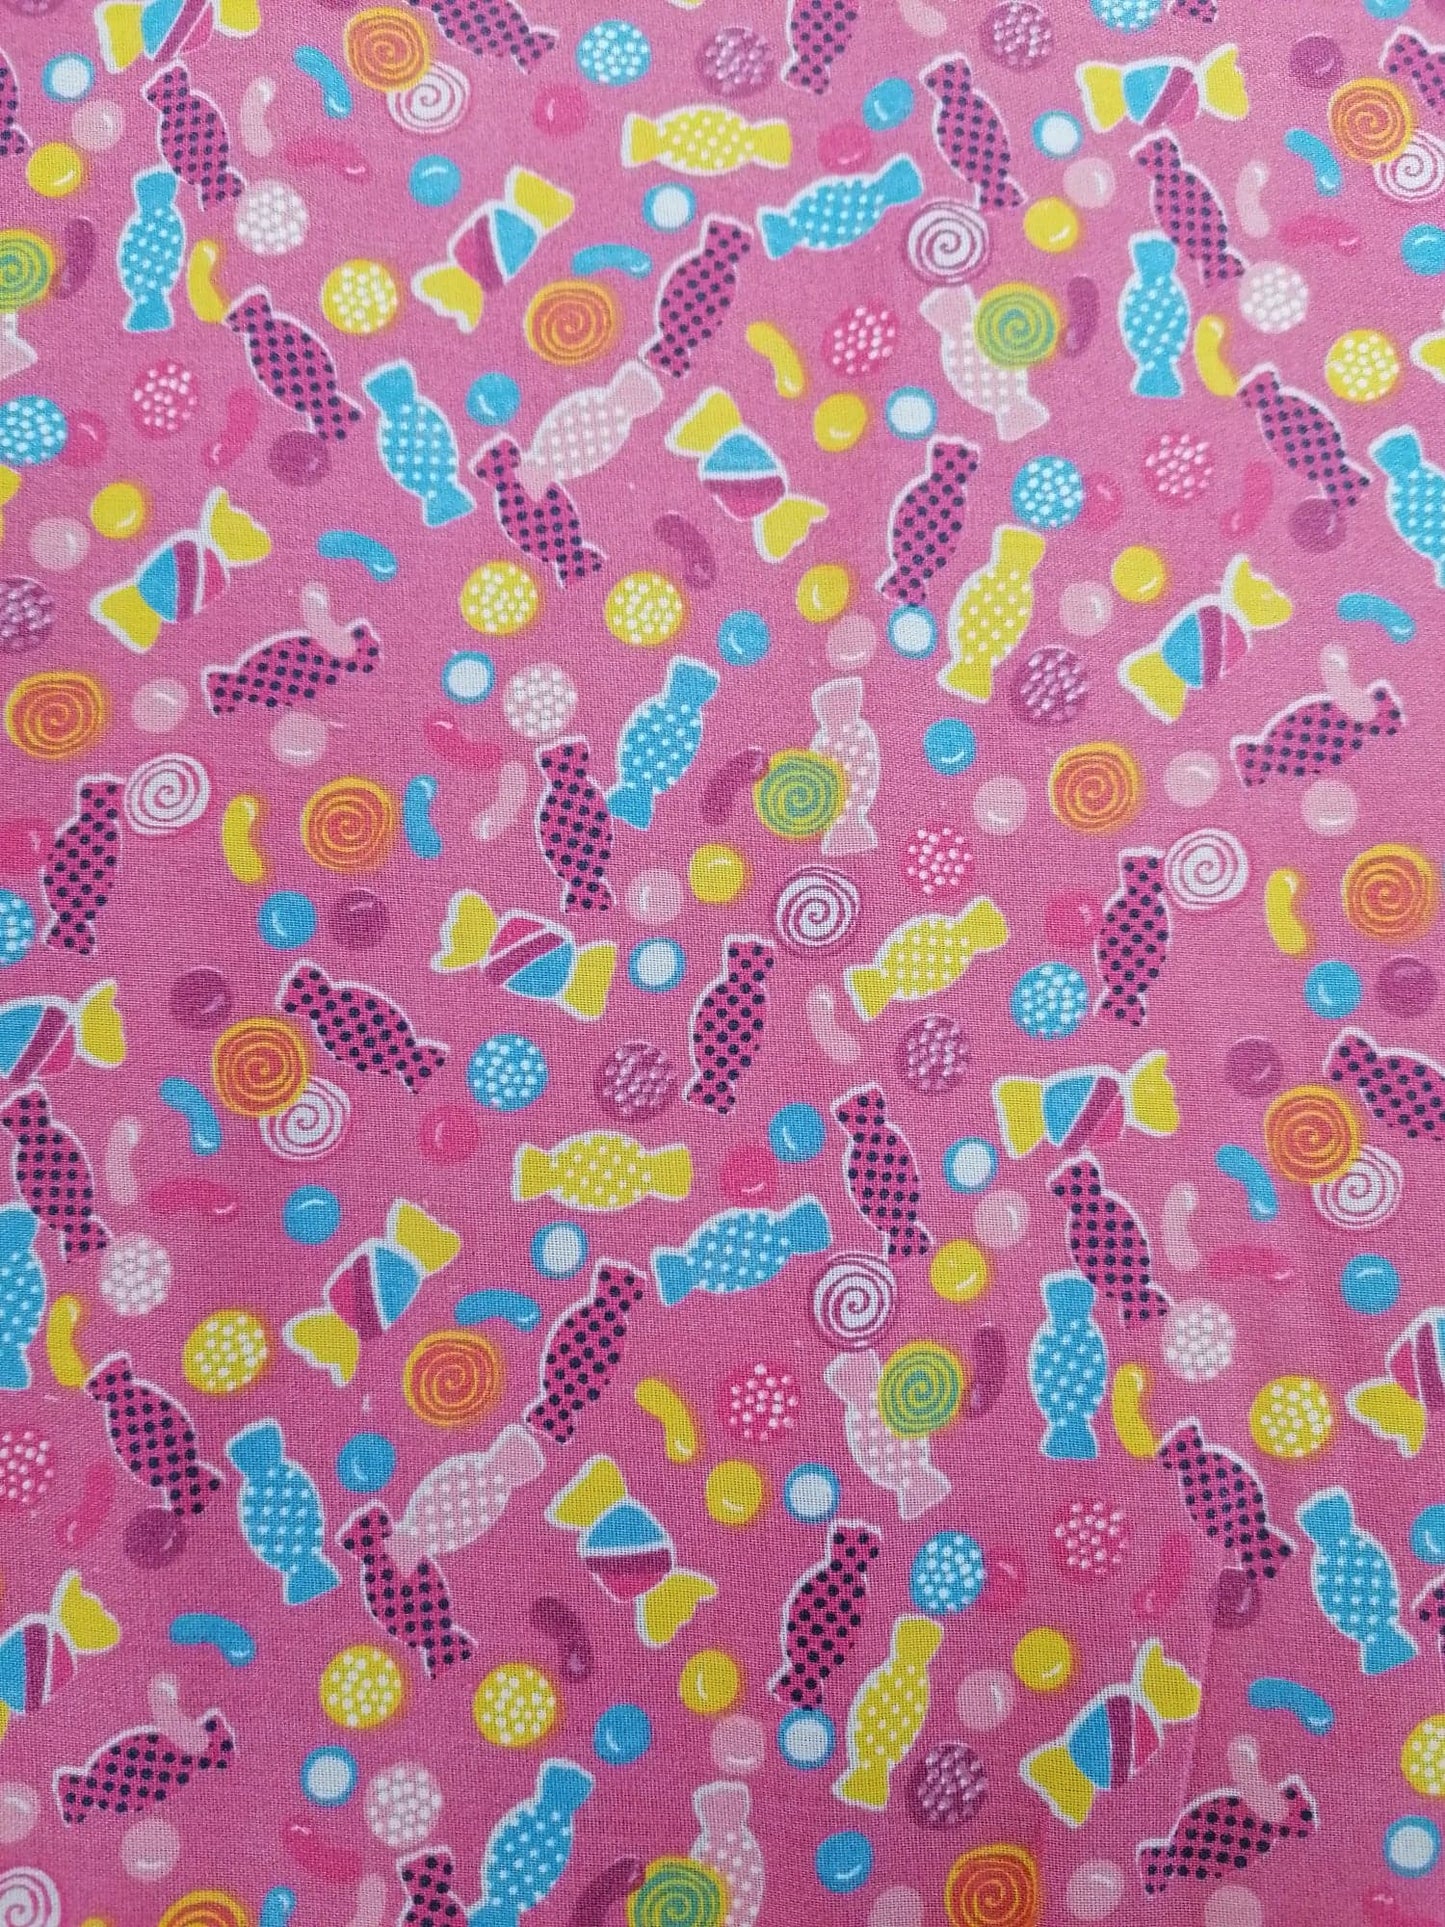 100% Cotton - Confectionery - Pink/Purple/Blue/Yellow - 45" Wide - Sold By The Metre